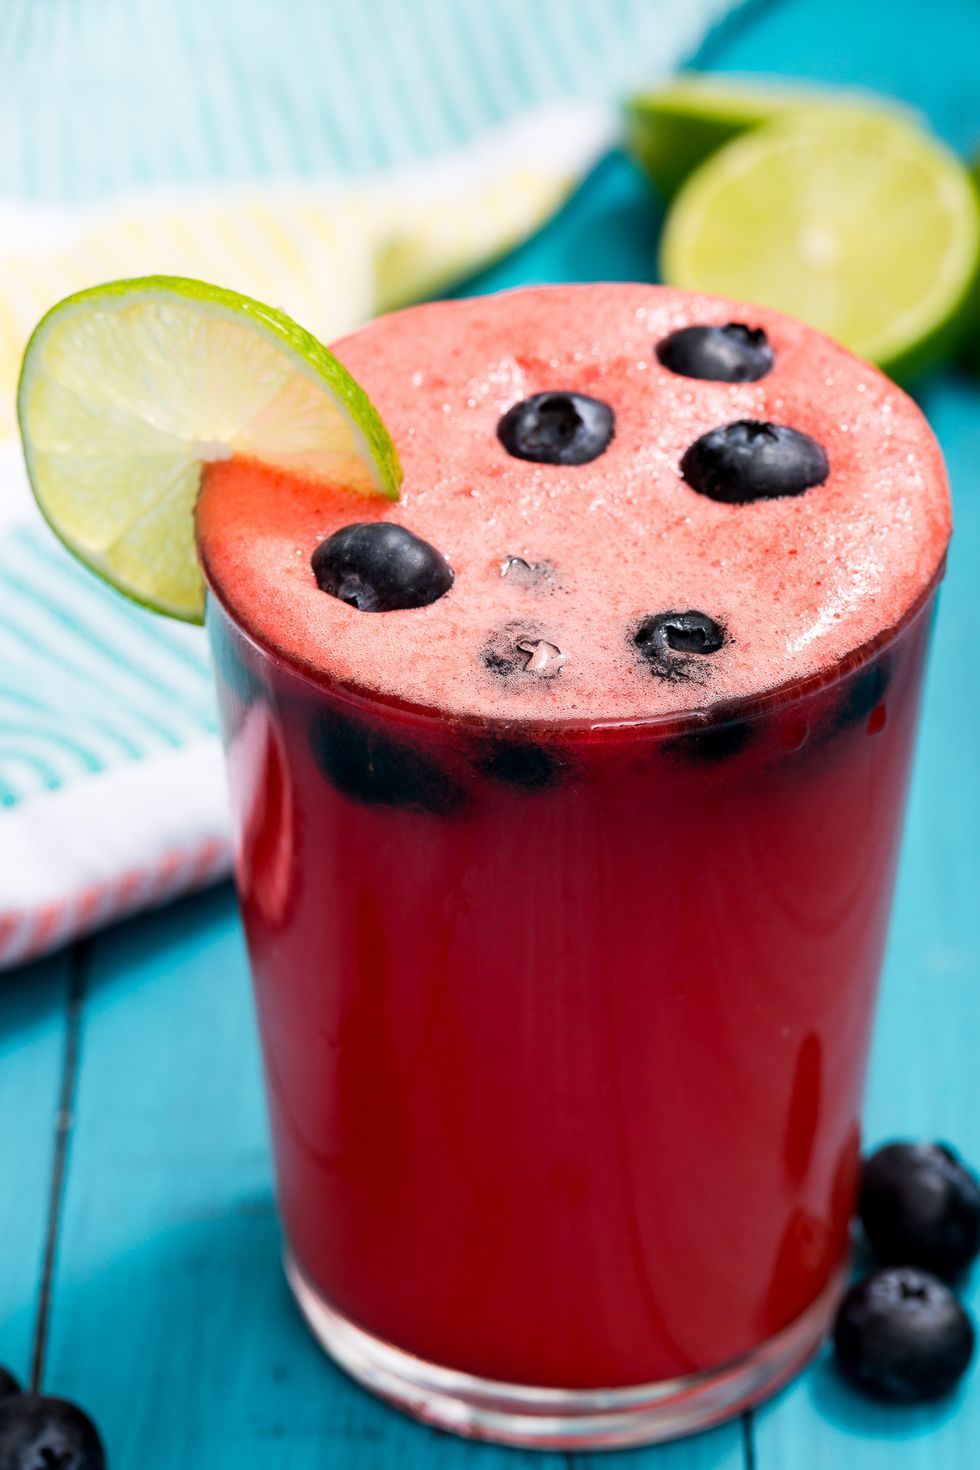 Blackberry, Food, Lime, Drink, Fruit, Non-alcoholic beverage, Blueberry, Plant, Berry, Juice, 